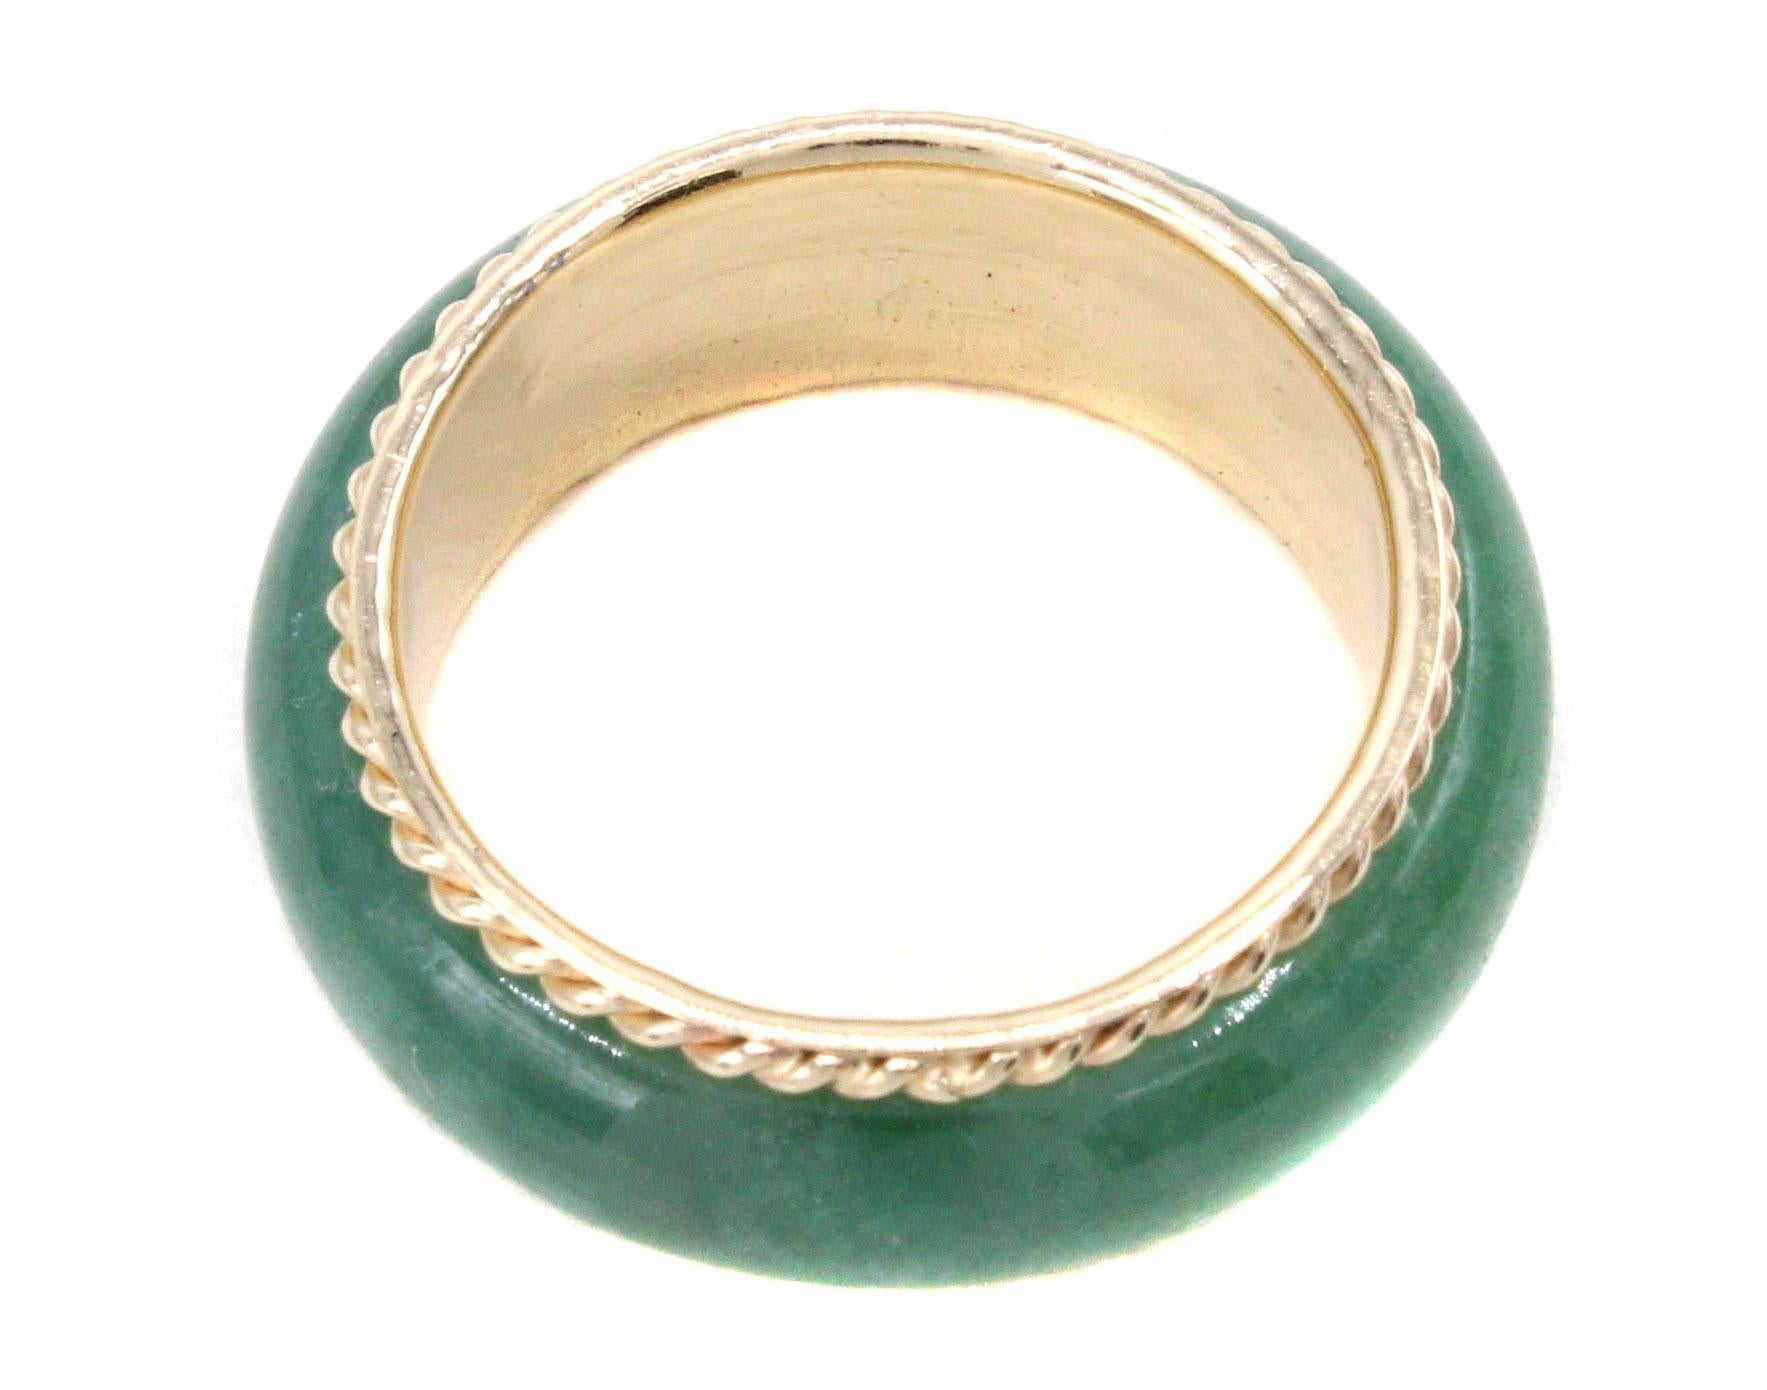 Ring of polished apple green jade cut our of one piece is set in a band of yellow gold embellished by a braided channel on either side. Ring size 6